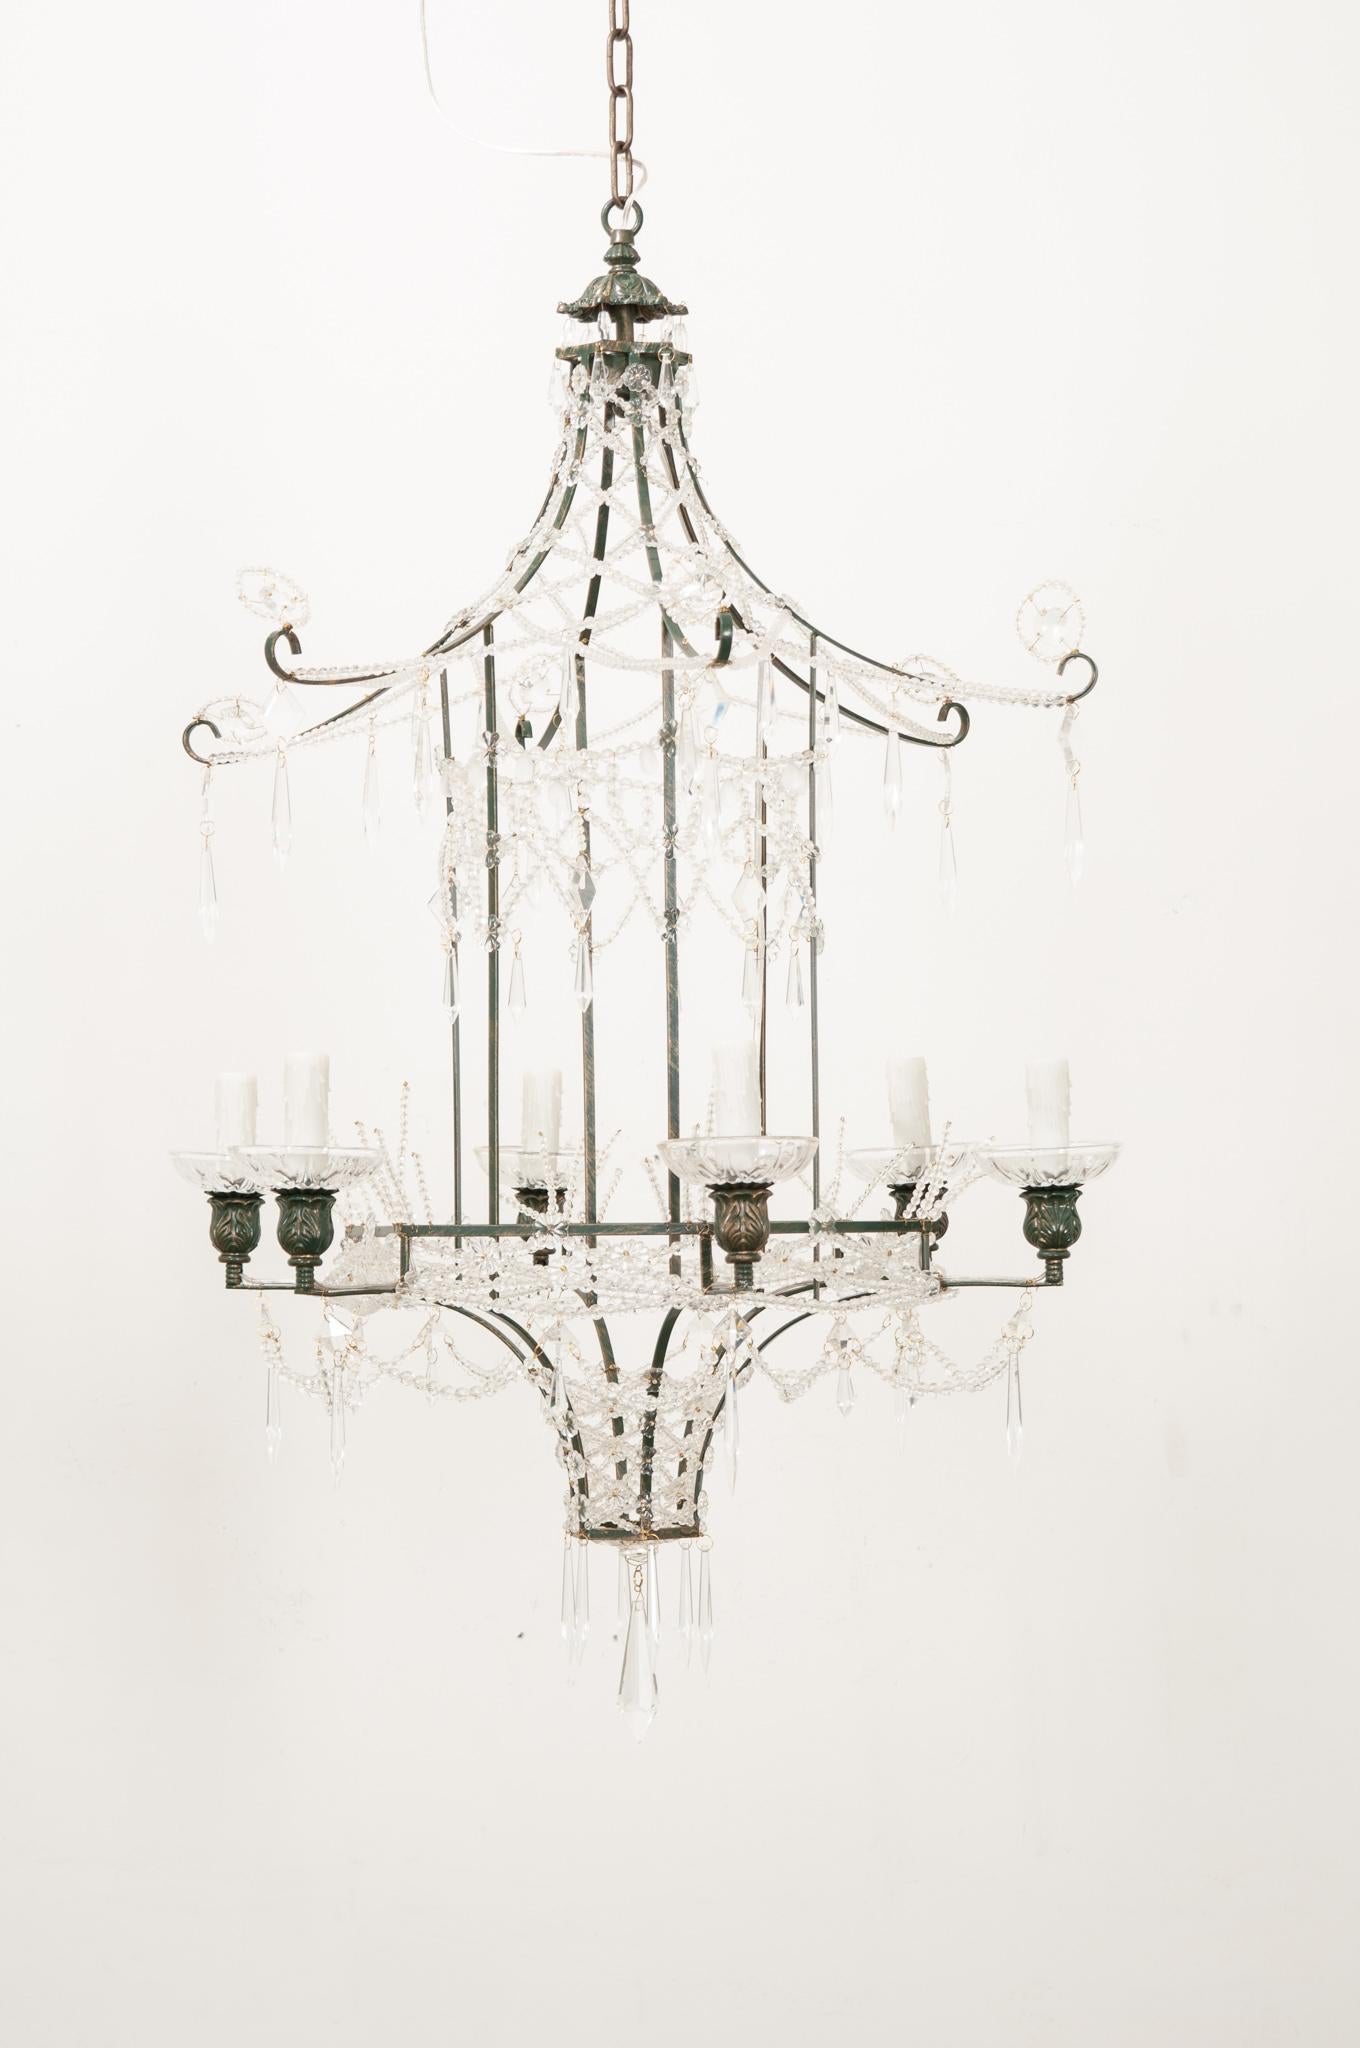 A whimsical painted metal chandelier in the form of a pagoda lantern is a striking composition in Chinoiserie style with a beaded sparkling body of faux crystal pearl swags, rosettes, frosted glass teardrops and multiple cut crystal prisms. Six